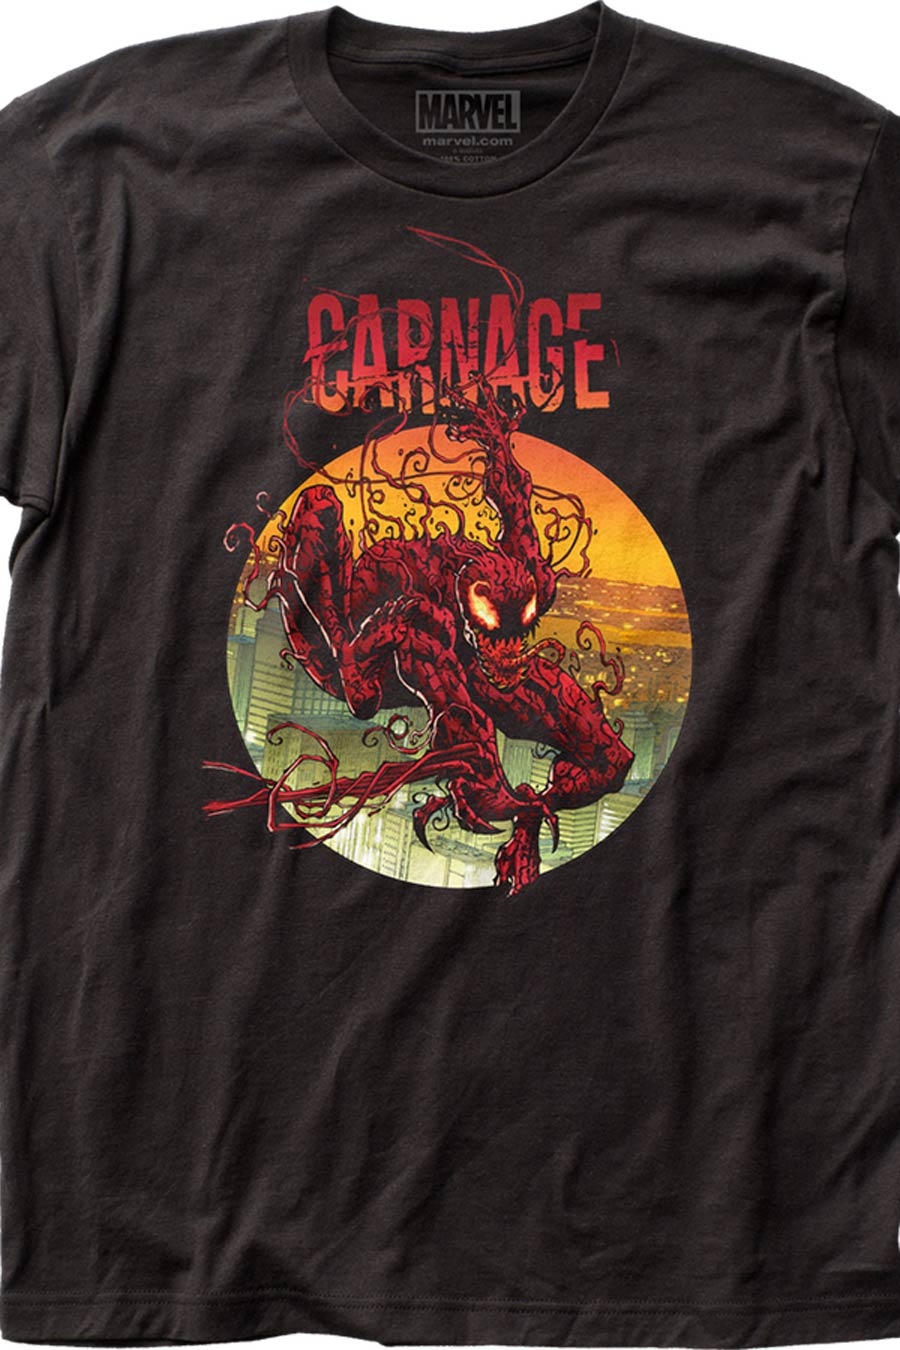 Carnage Climbing Out Fitted Jersey Black Mens T-Shirt Large